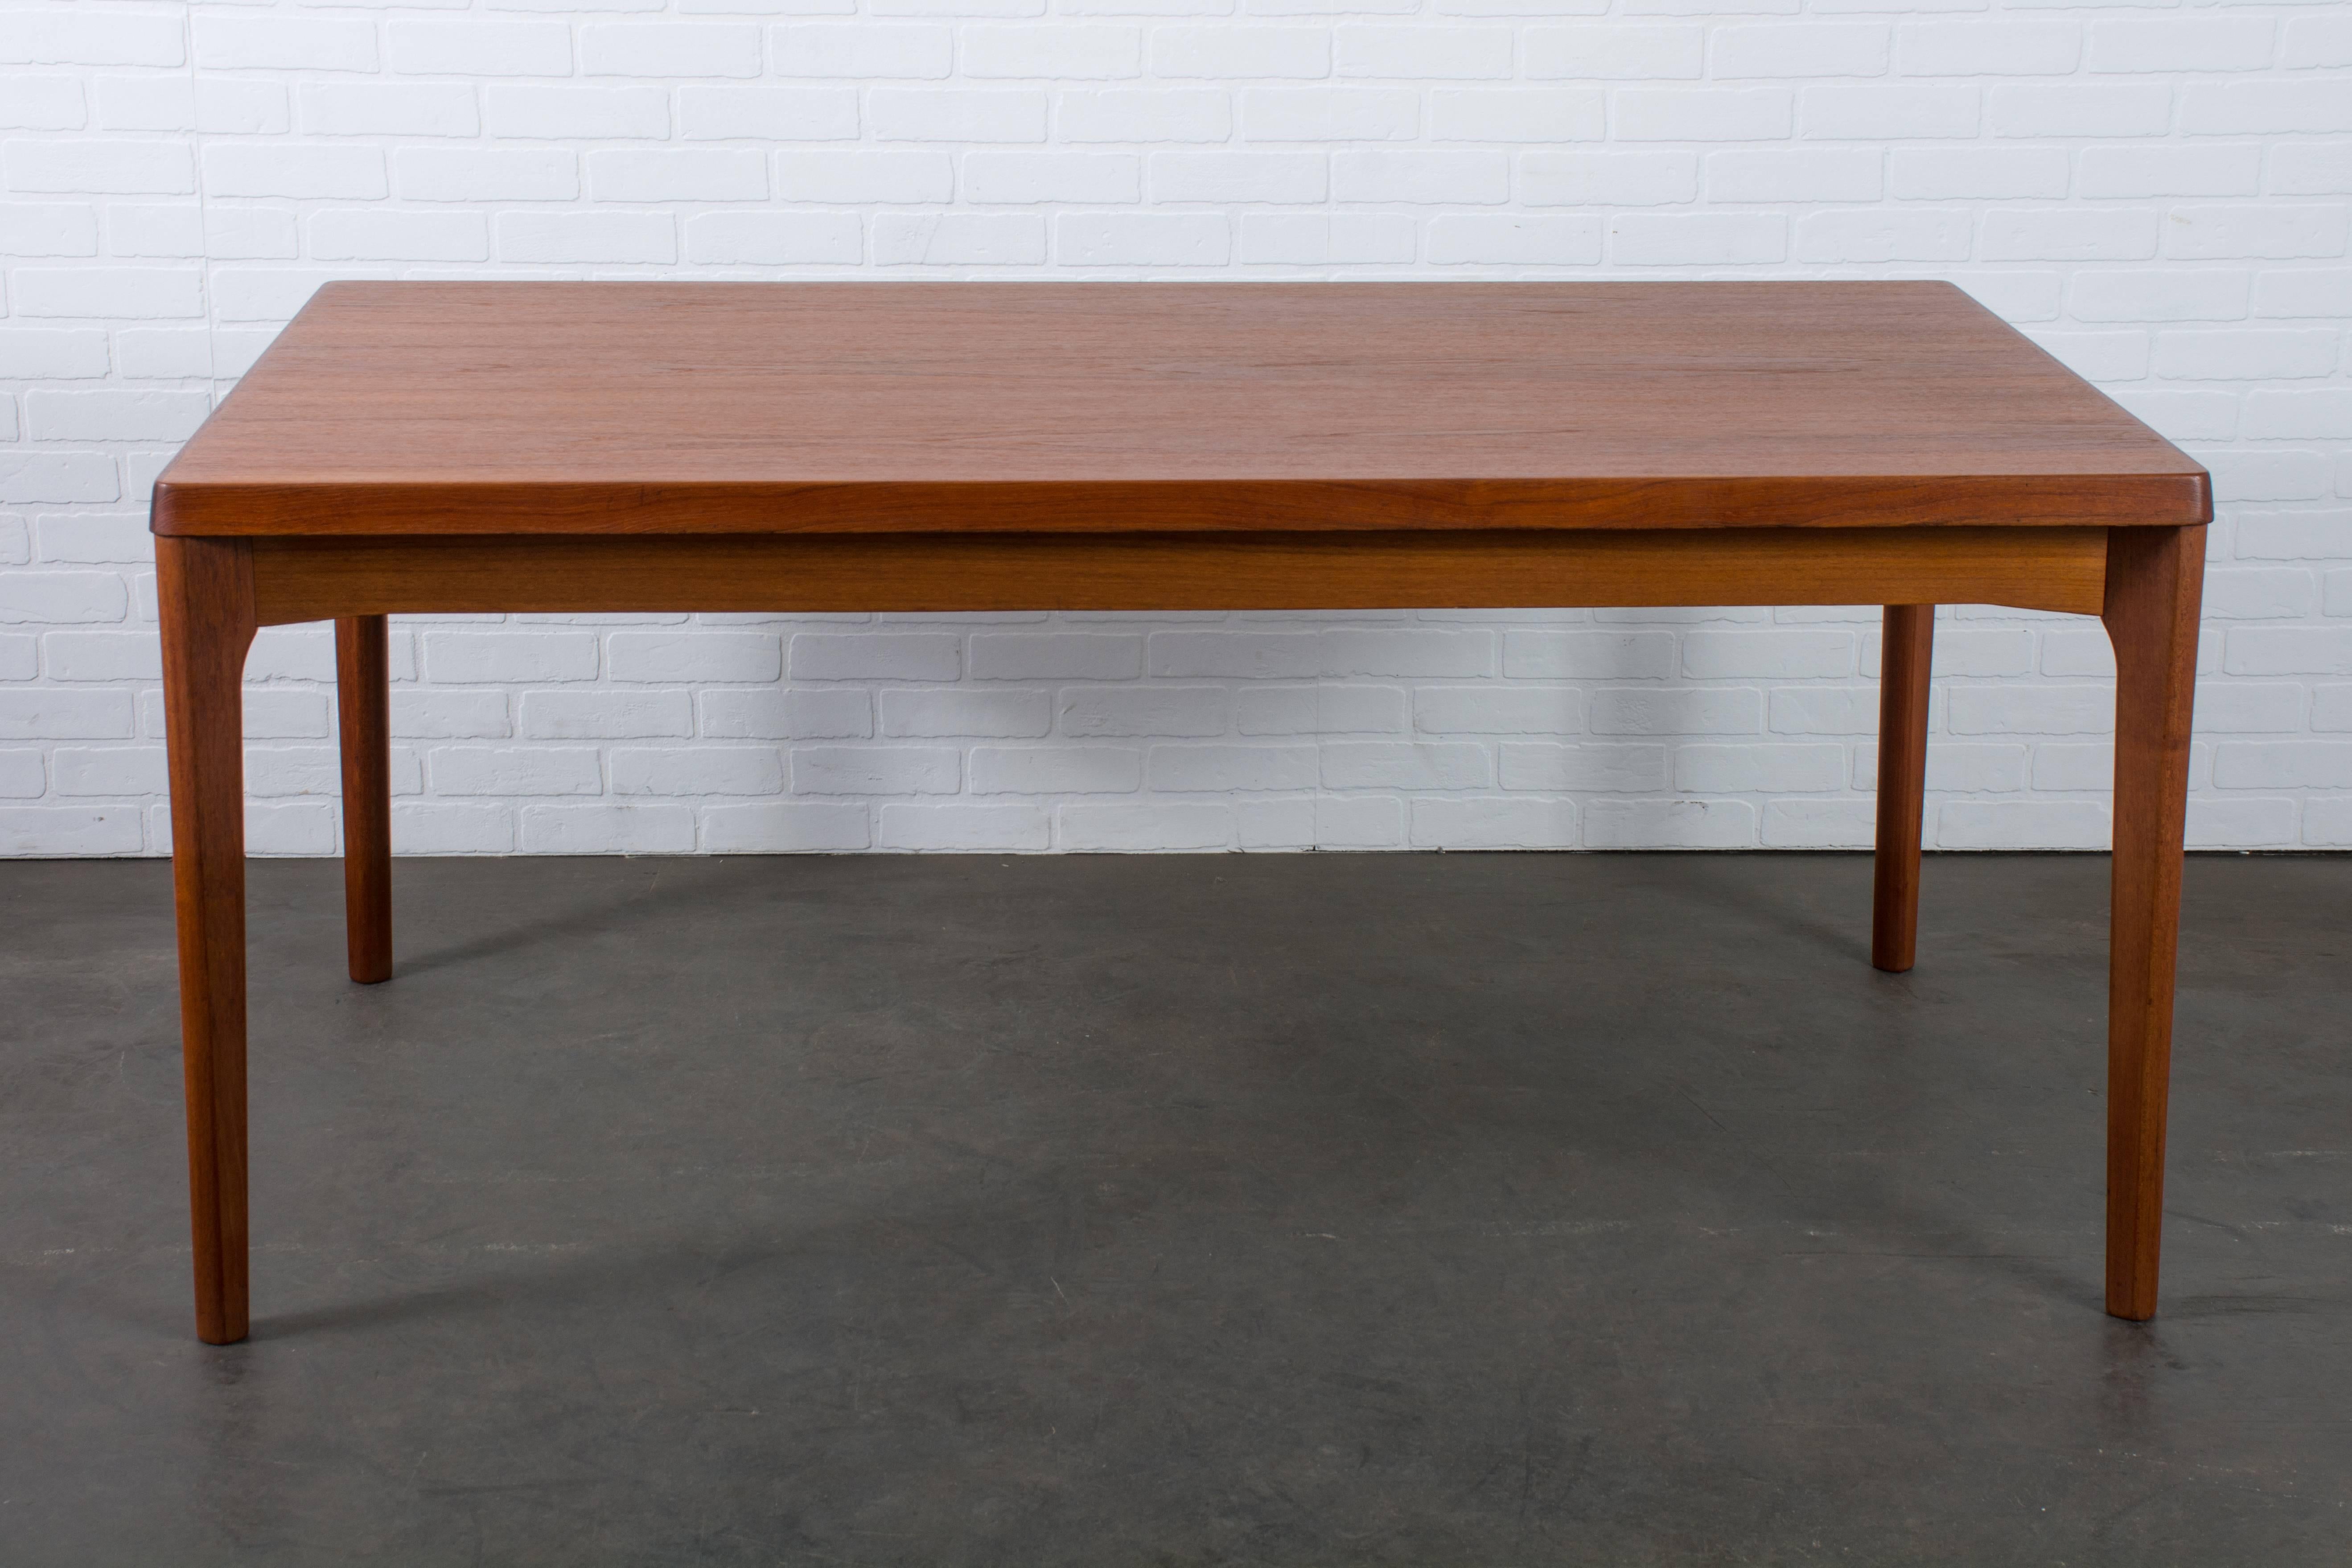 This vintage Mid-Century teak dining table was designed by Henning Kjaernulf for Vejle Stole Mobelfabrik in the 1960s. It features two leaves that can be pulled out to extend the table. They are stored under the table and slide out easily when you